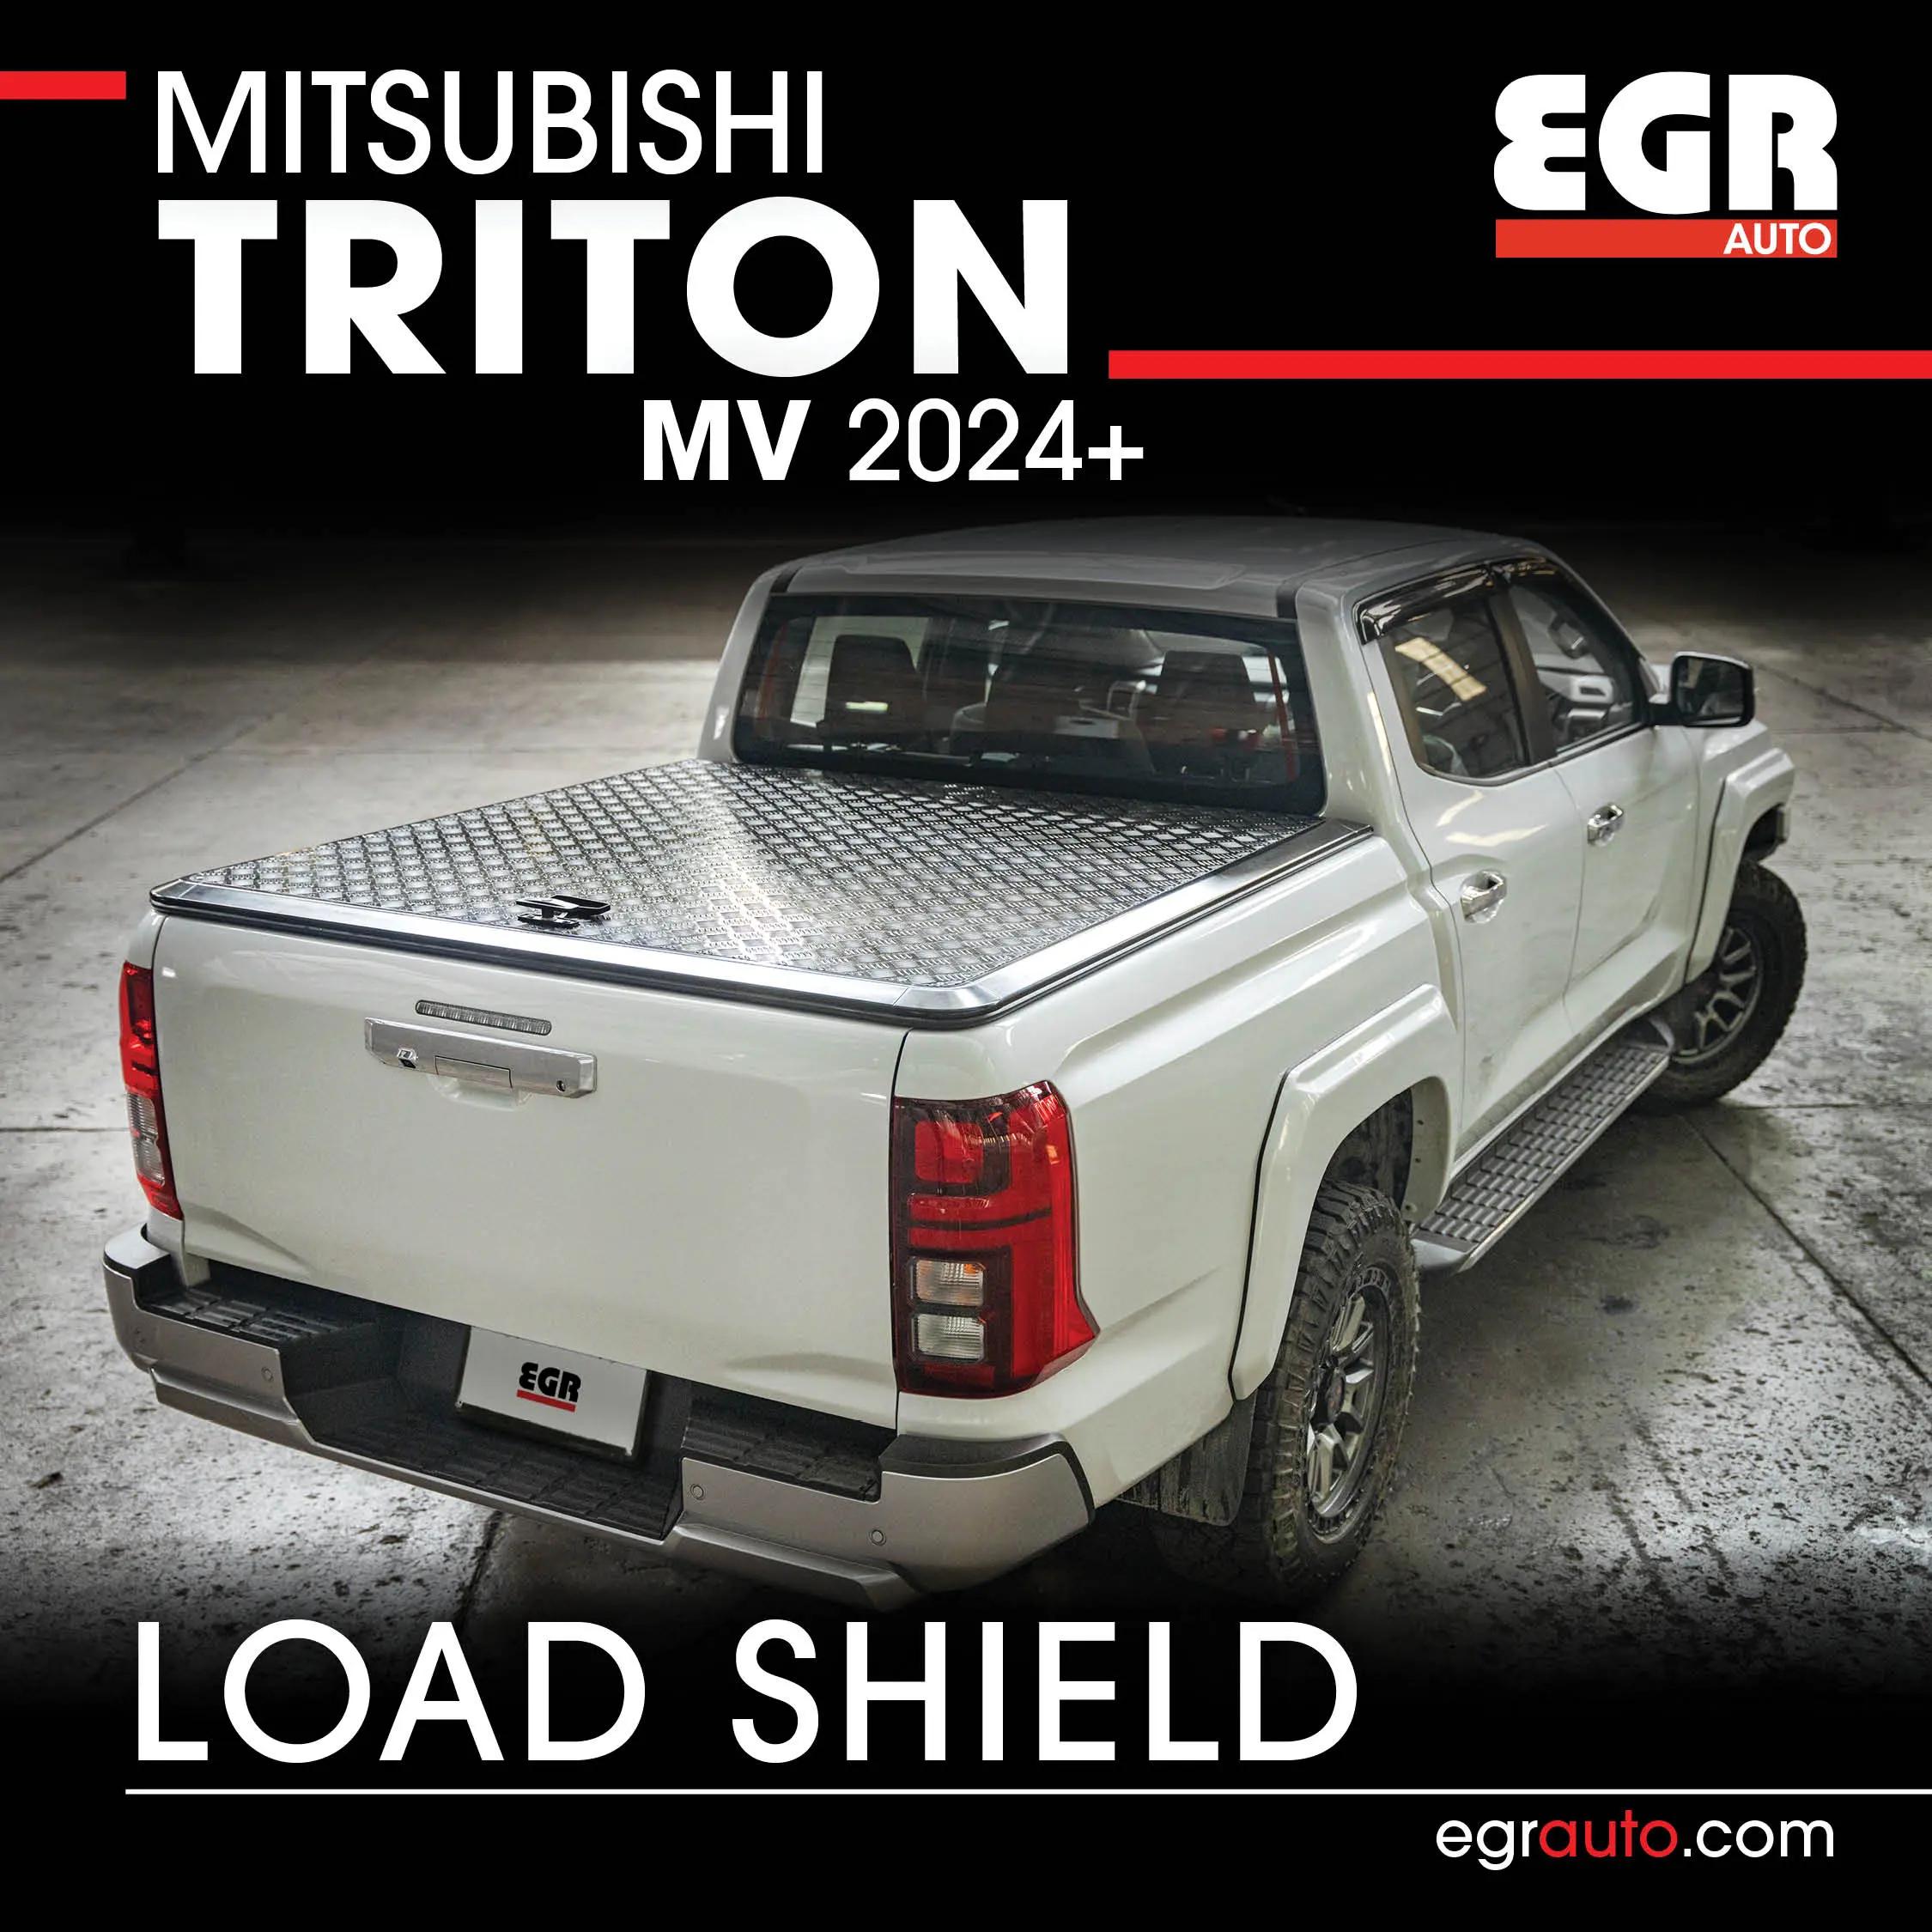 Promo banner - Click here for new EGR Load Shield available now for the Mitsubishi Triton MV 2024.